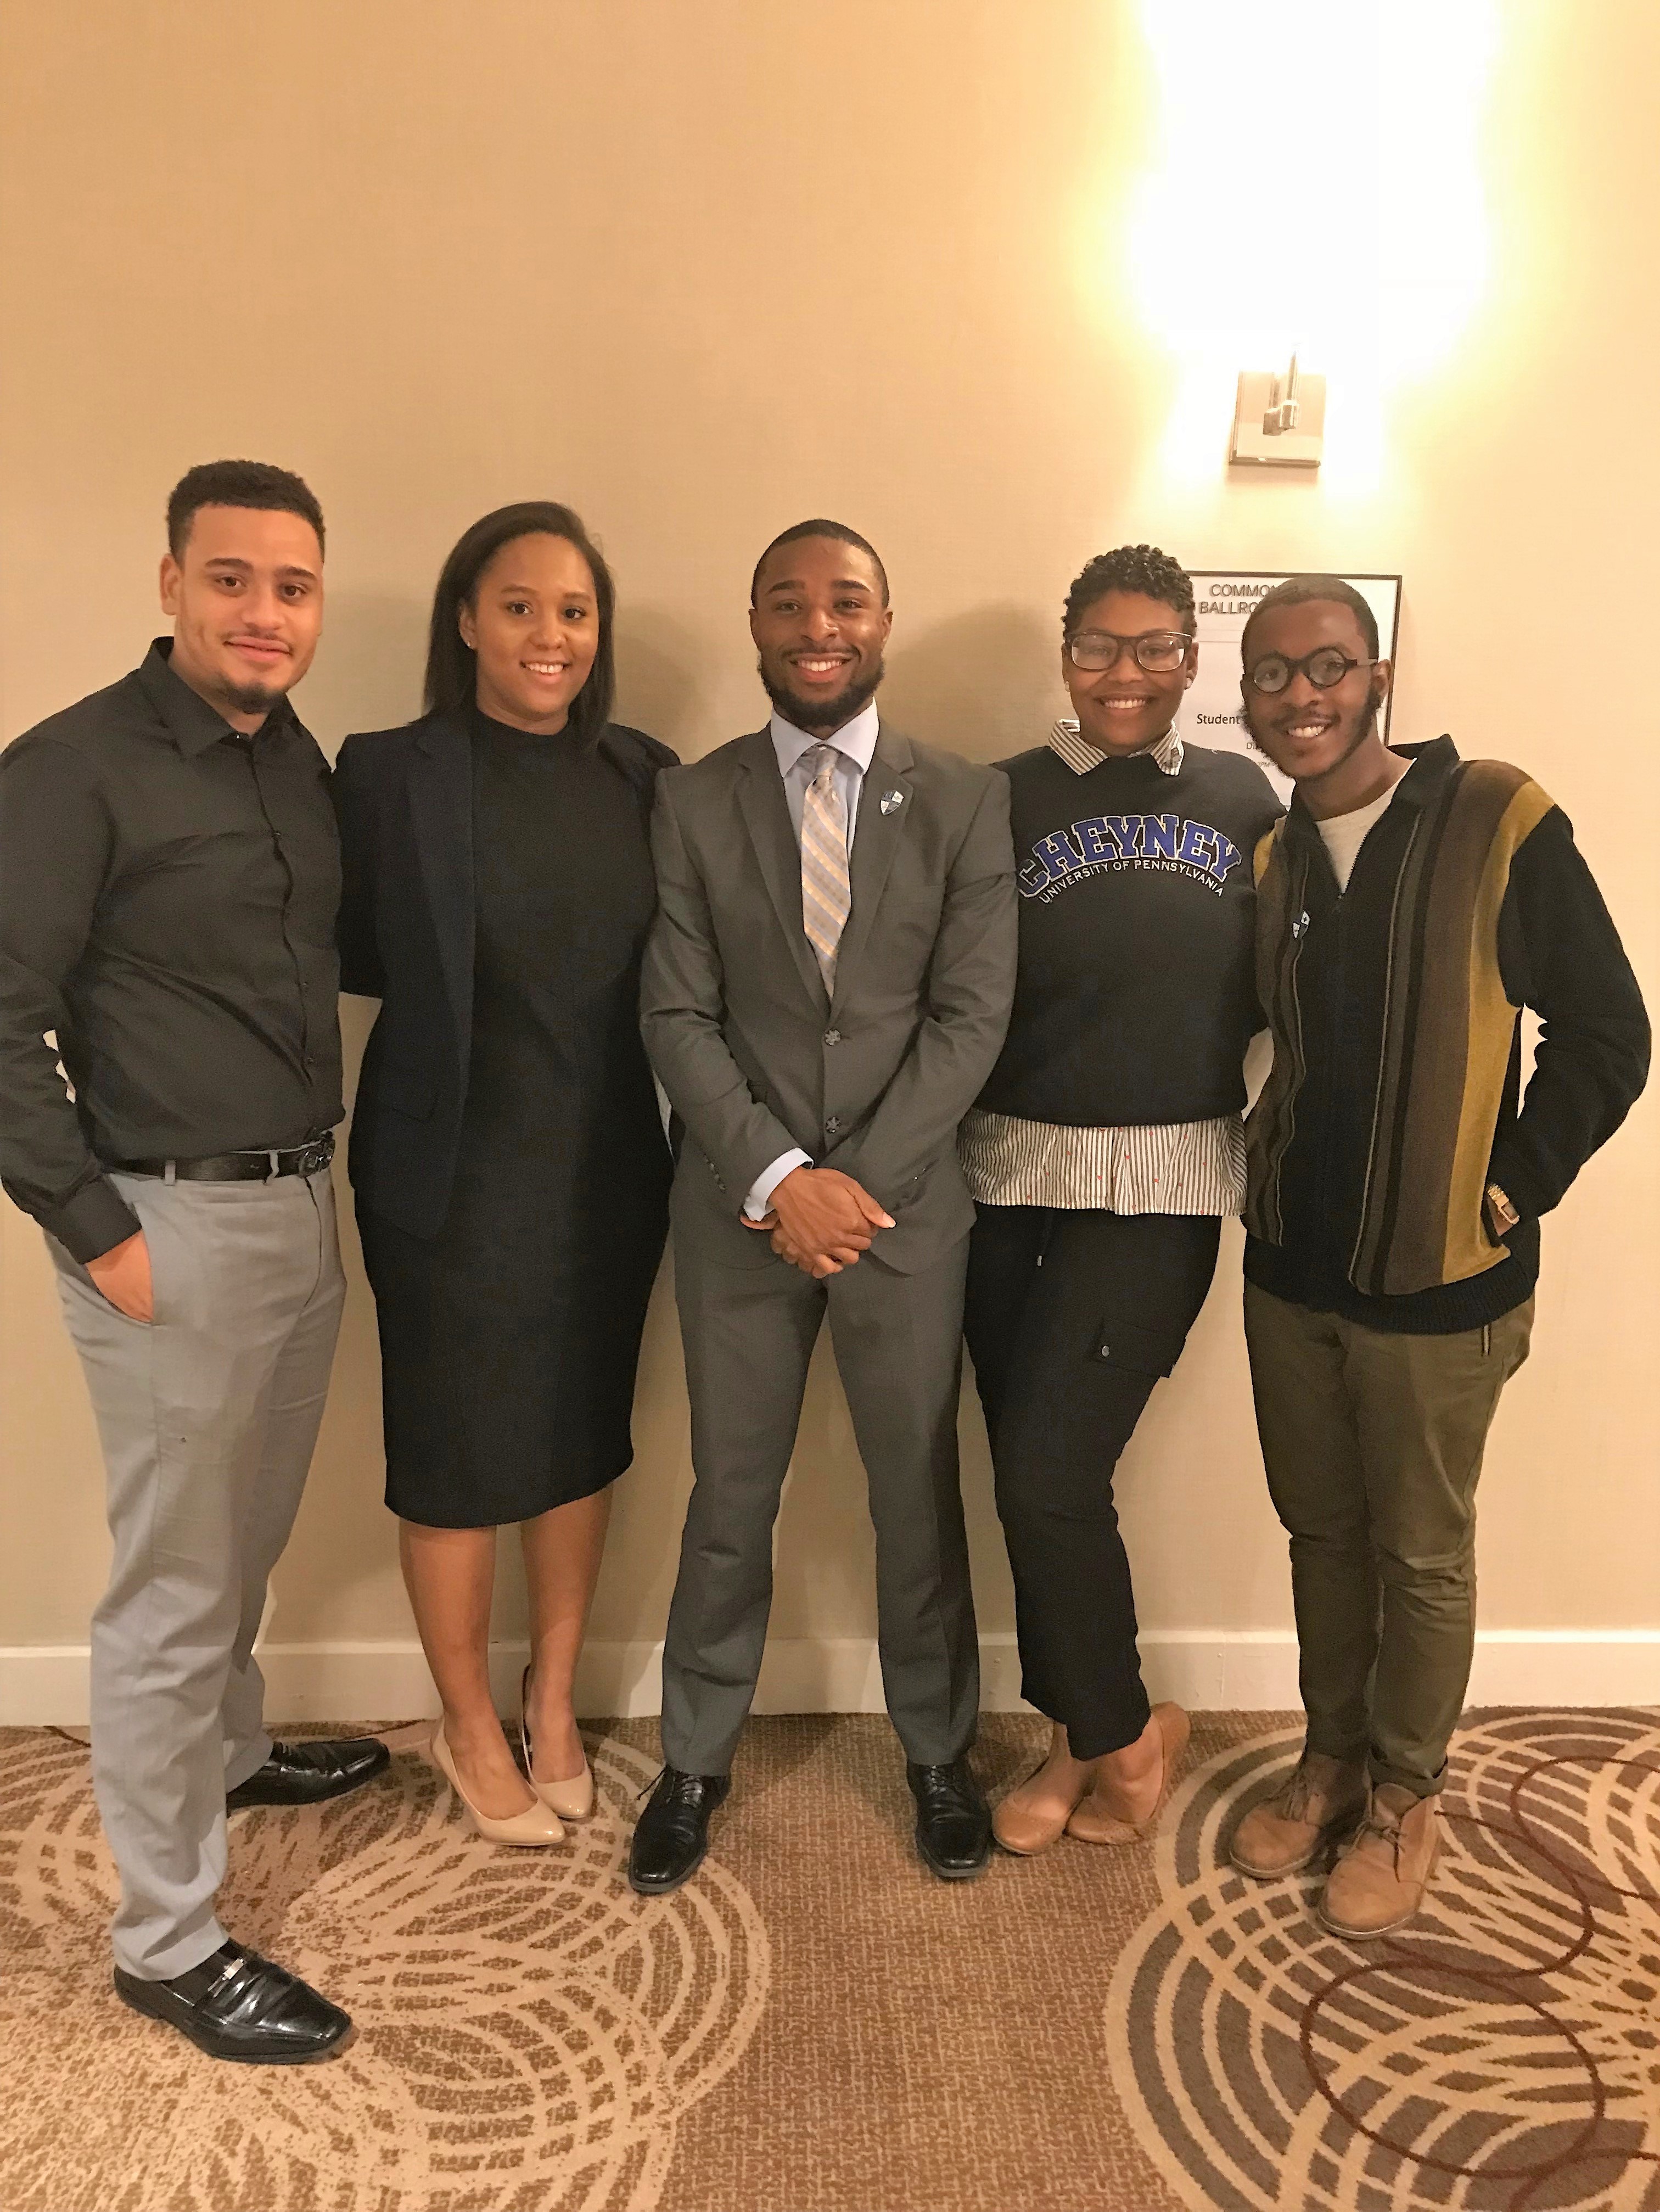 Cheyney Students Participate in Annual Robert D. Lynch Student Leadership Institute